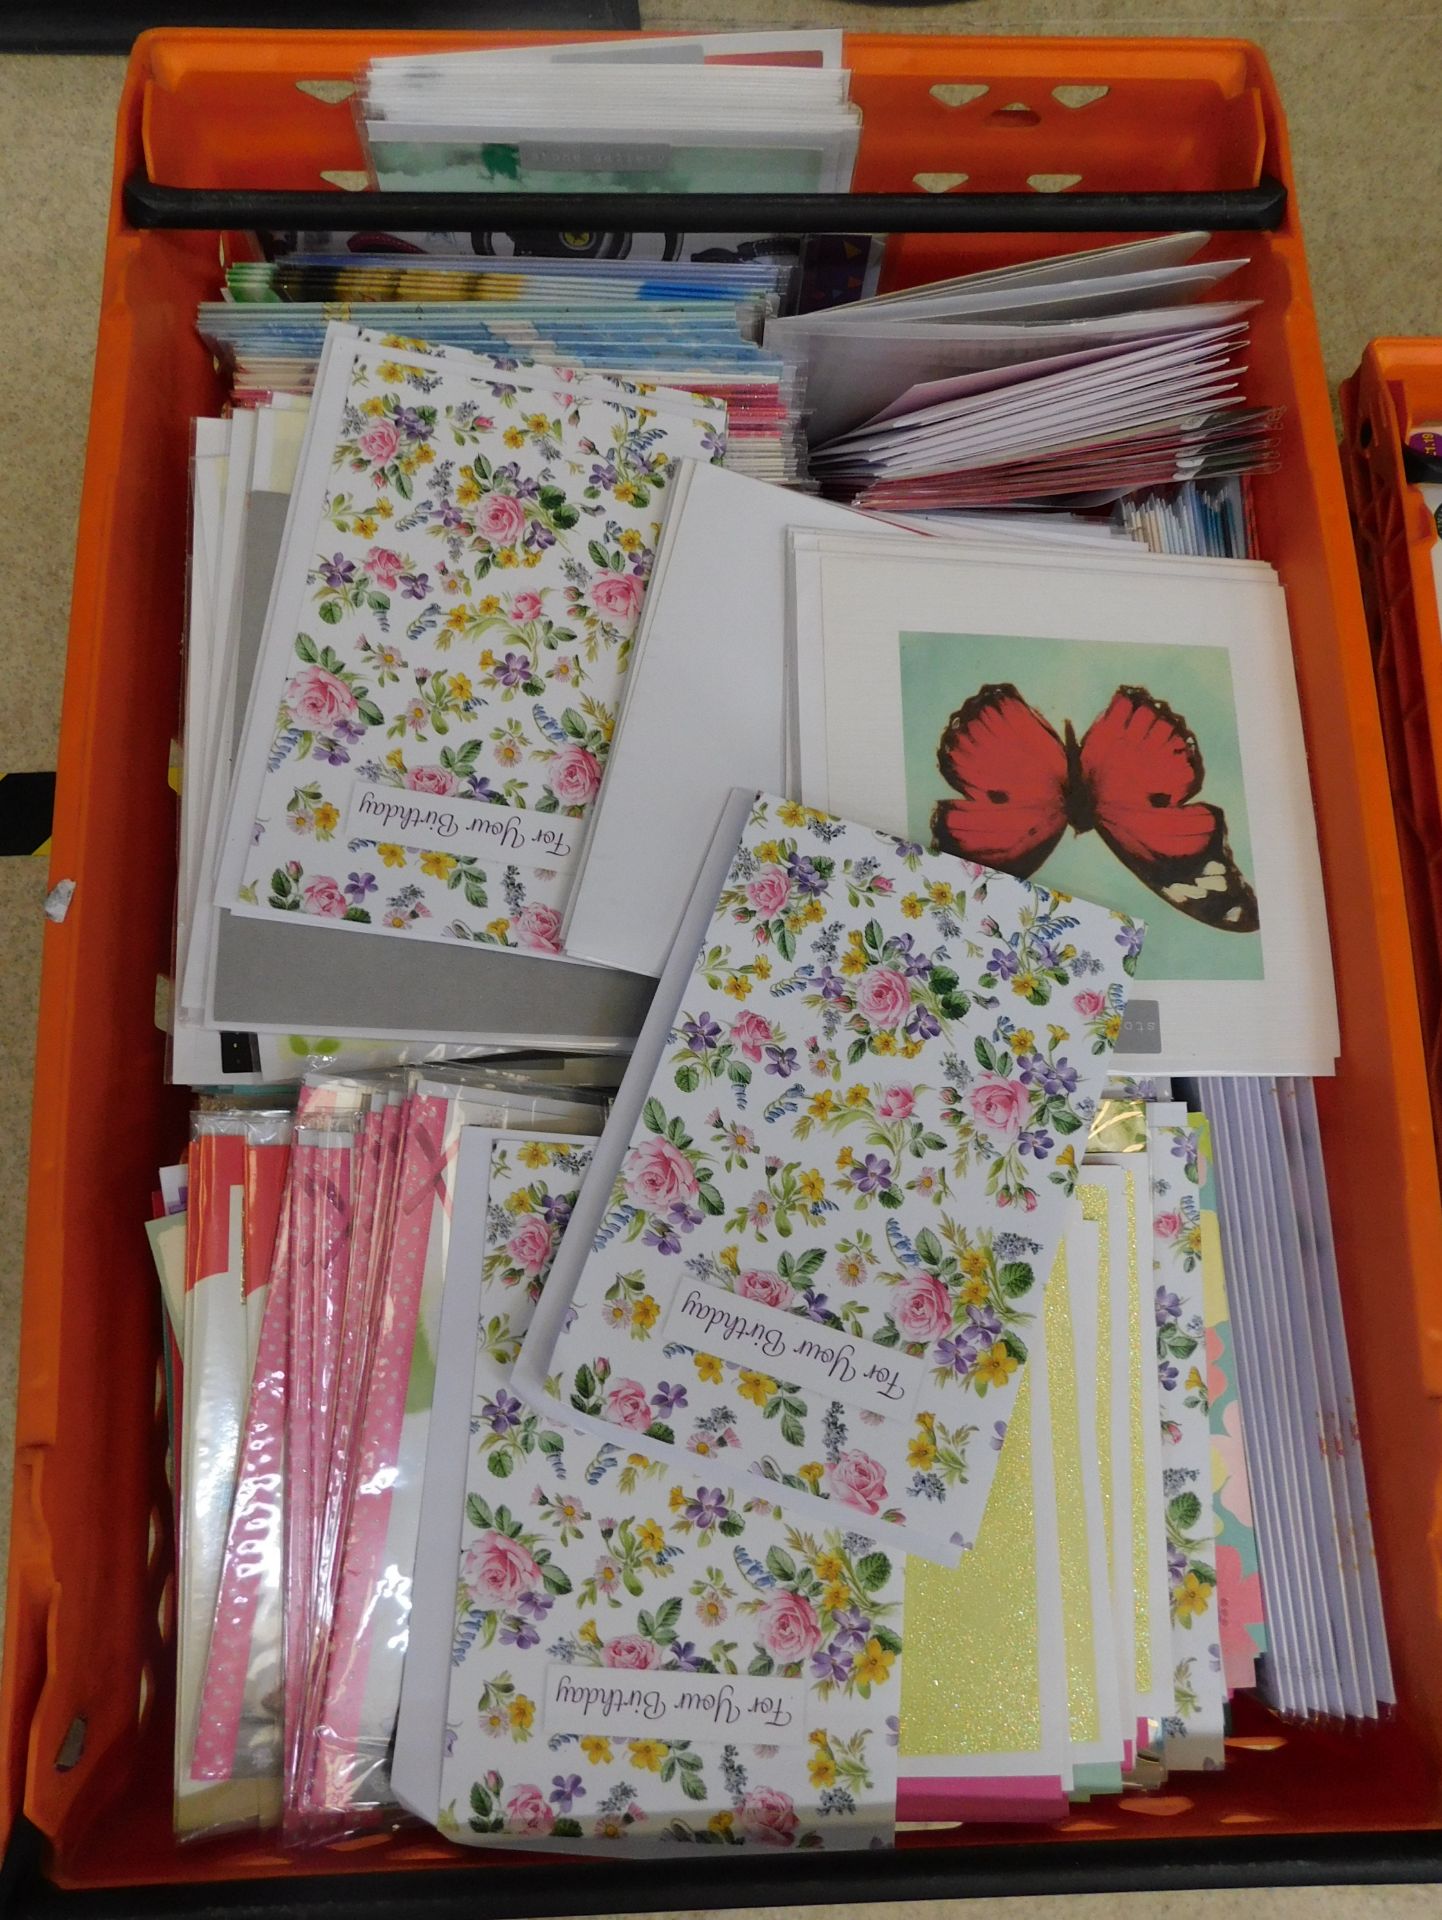 Contents of 4 Crates to Include Everyday Greetings Cards (Crates Not Included, Buyers Must Bring - Image 4 of 5